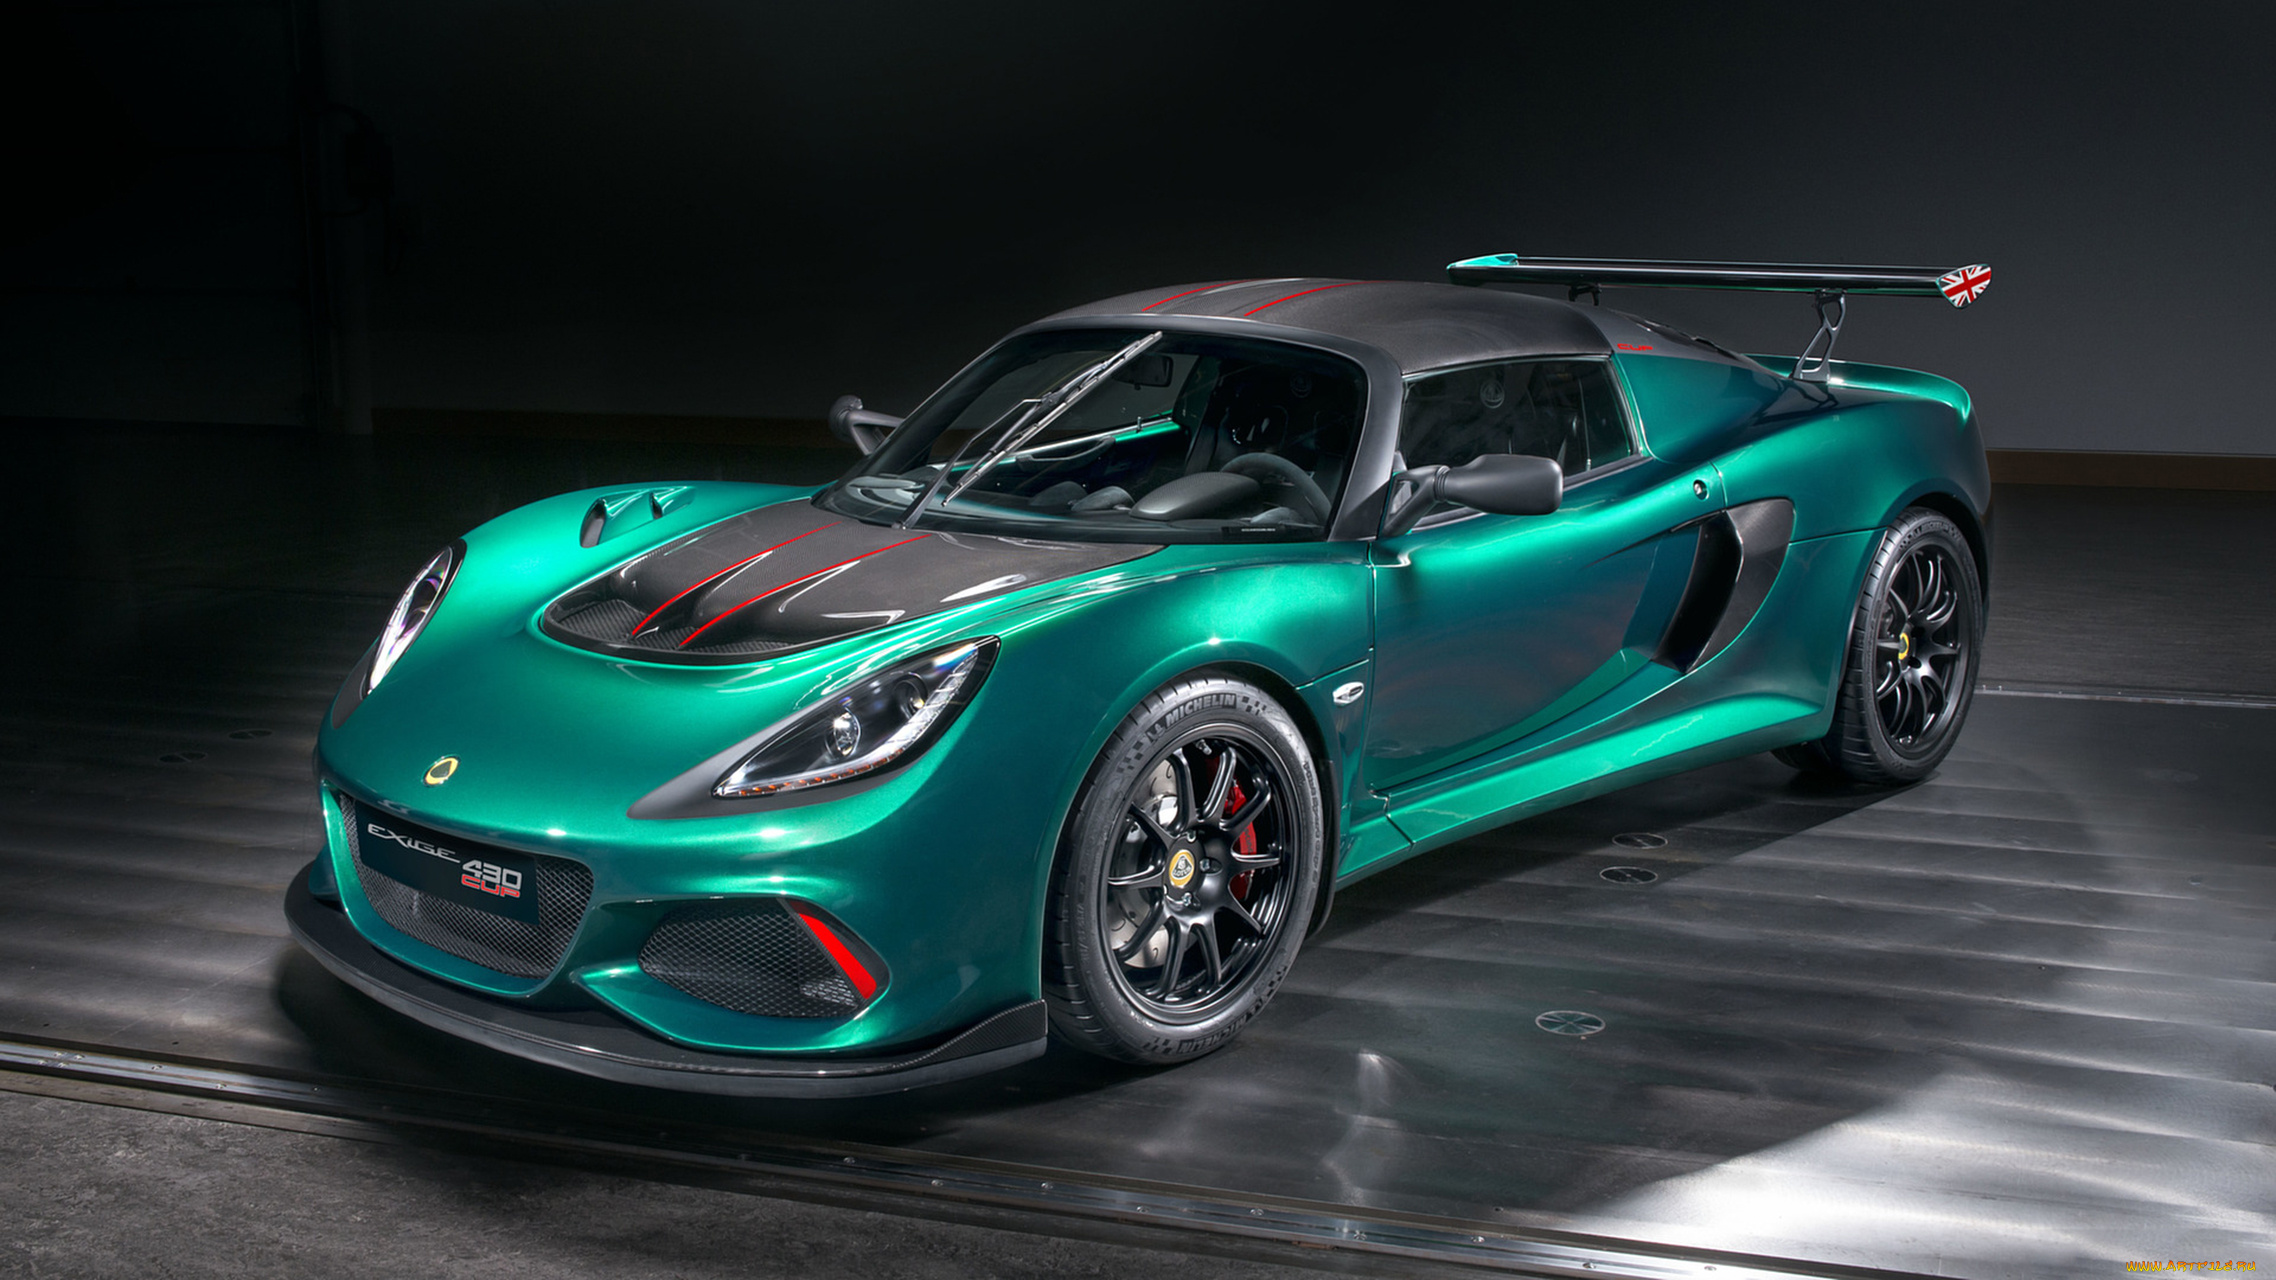 lotus, exige, cup, 430, unlimited, edition, 2018, автомобили, lotus, unlimited, 430, cup, exige, 2018, edition